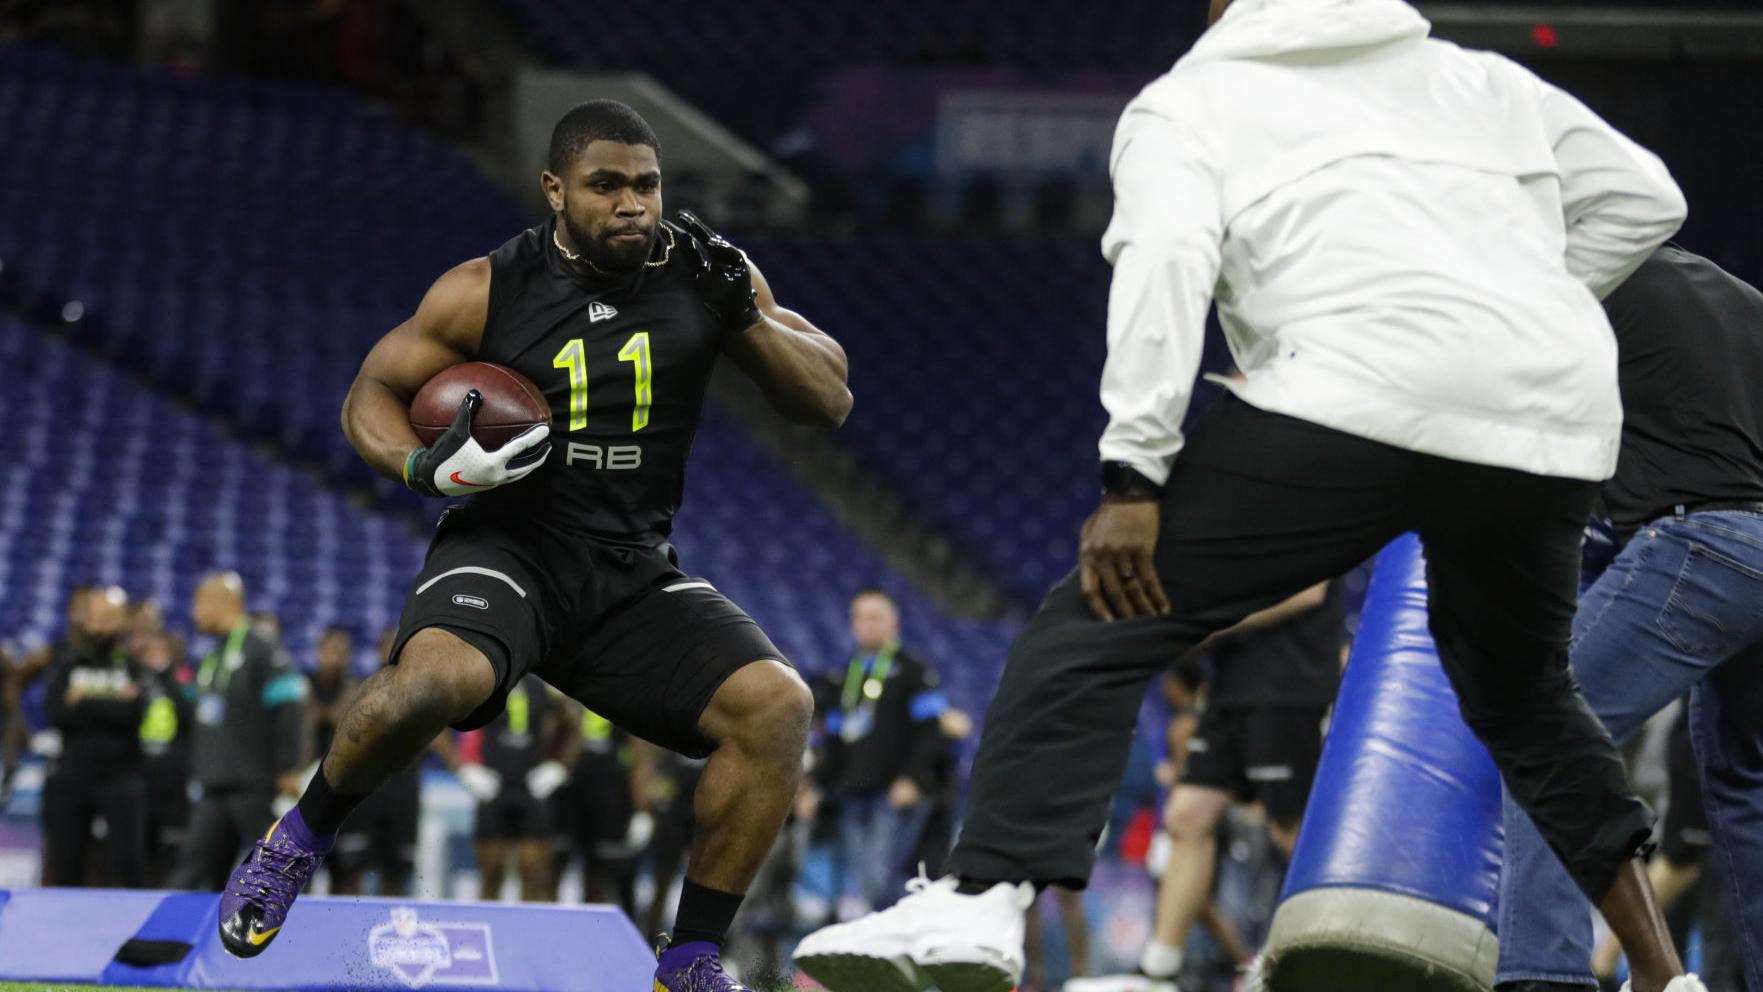 Edwards-Helaire among 7 LSU players entering NFL draft